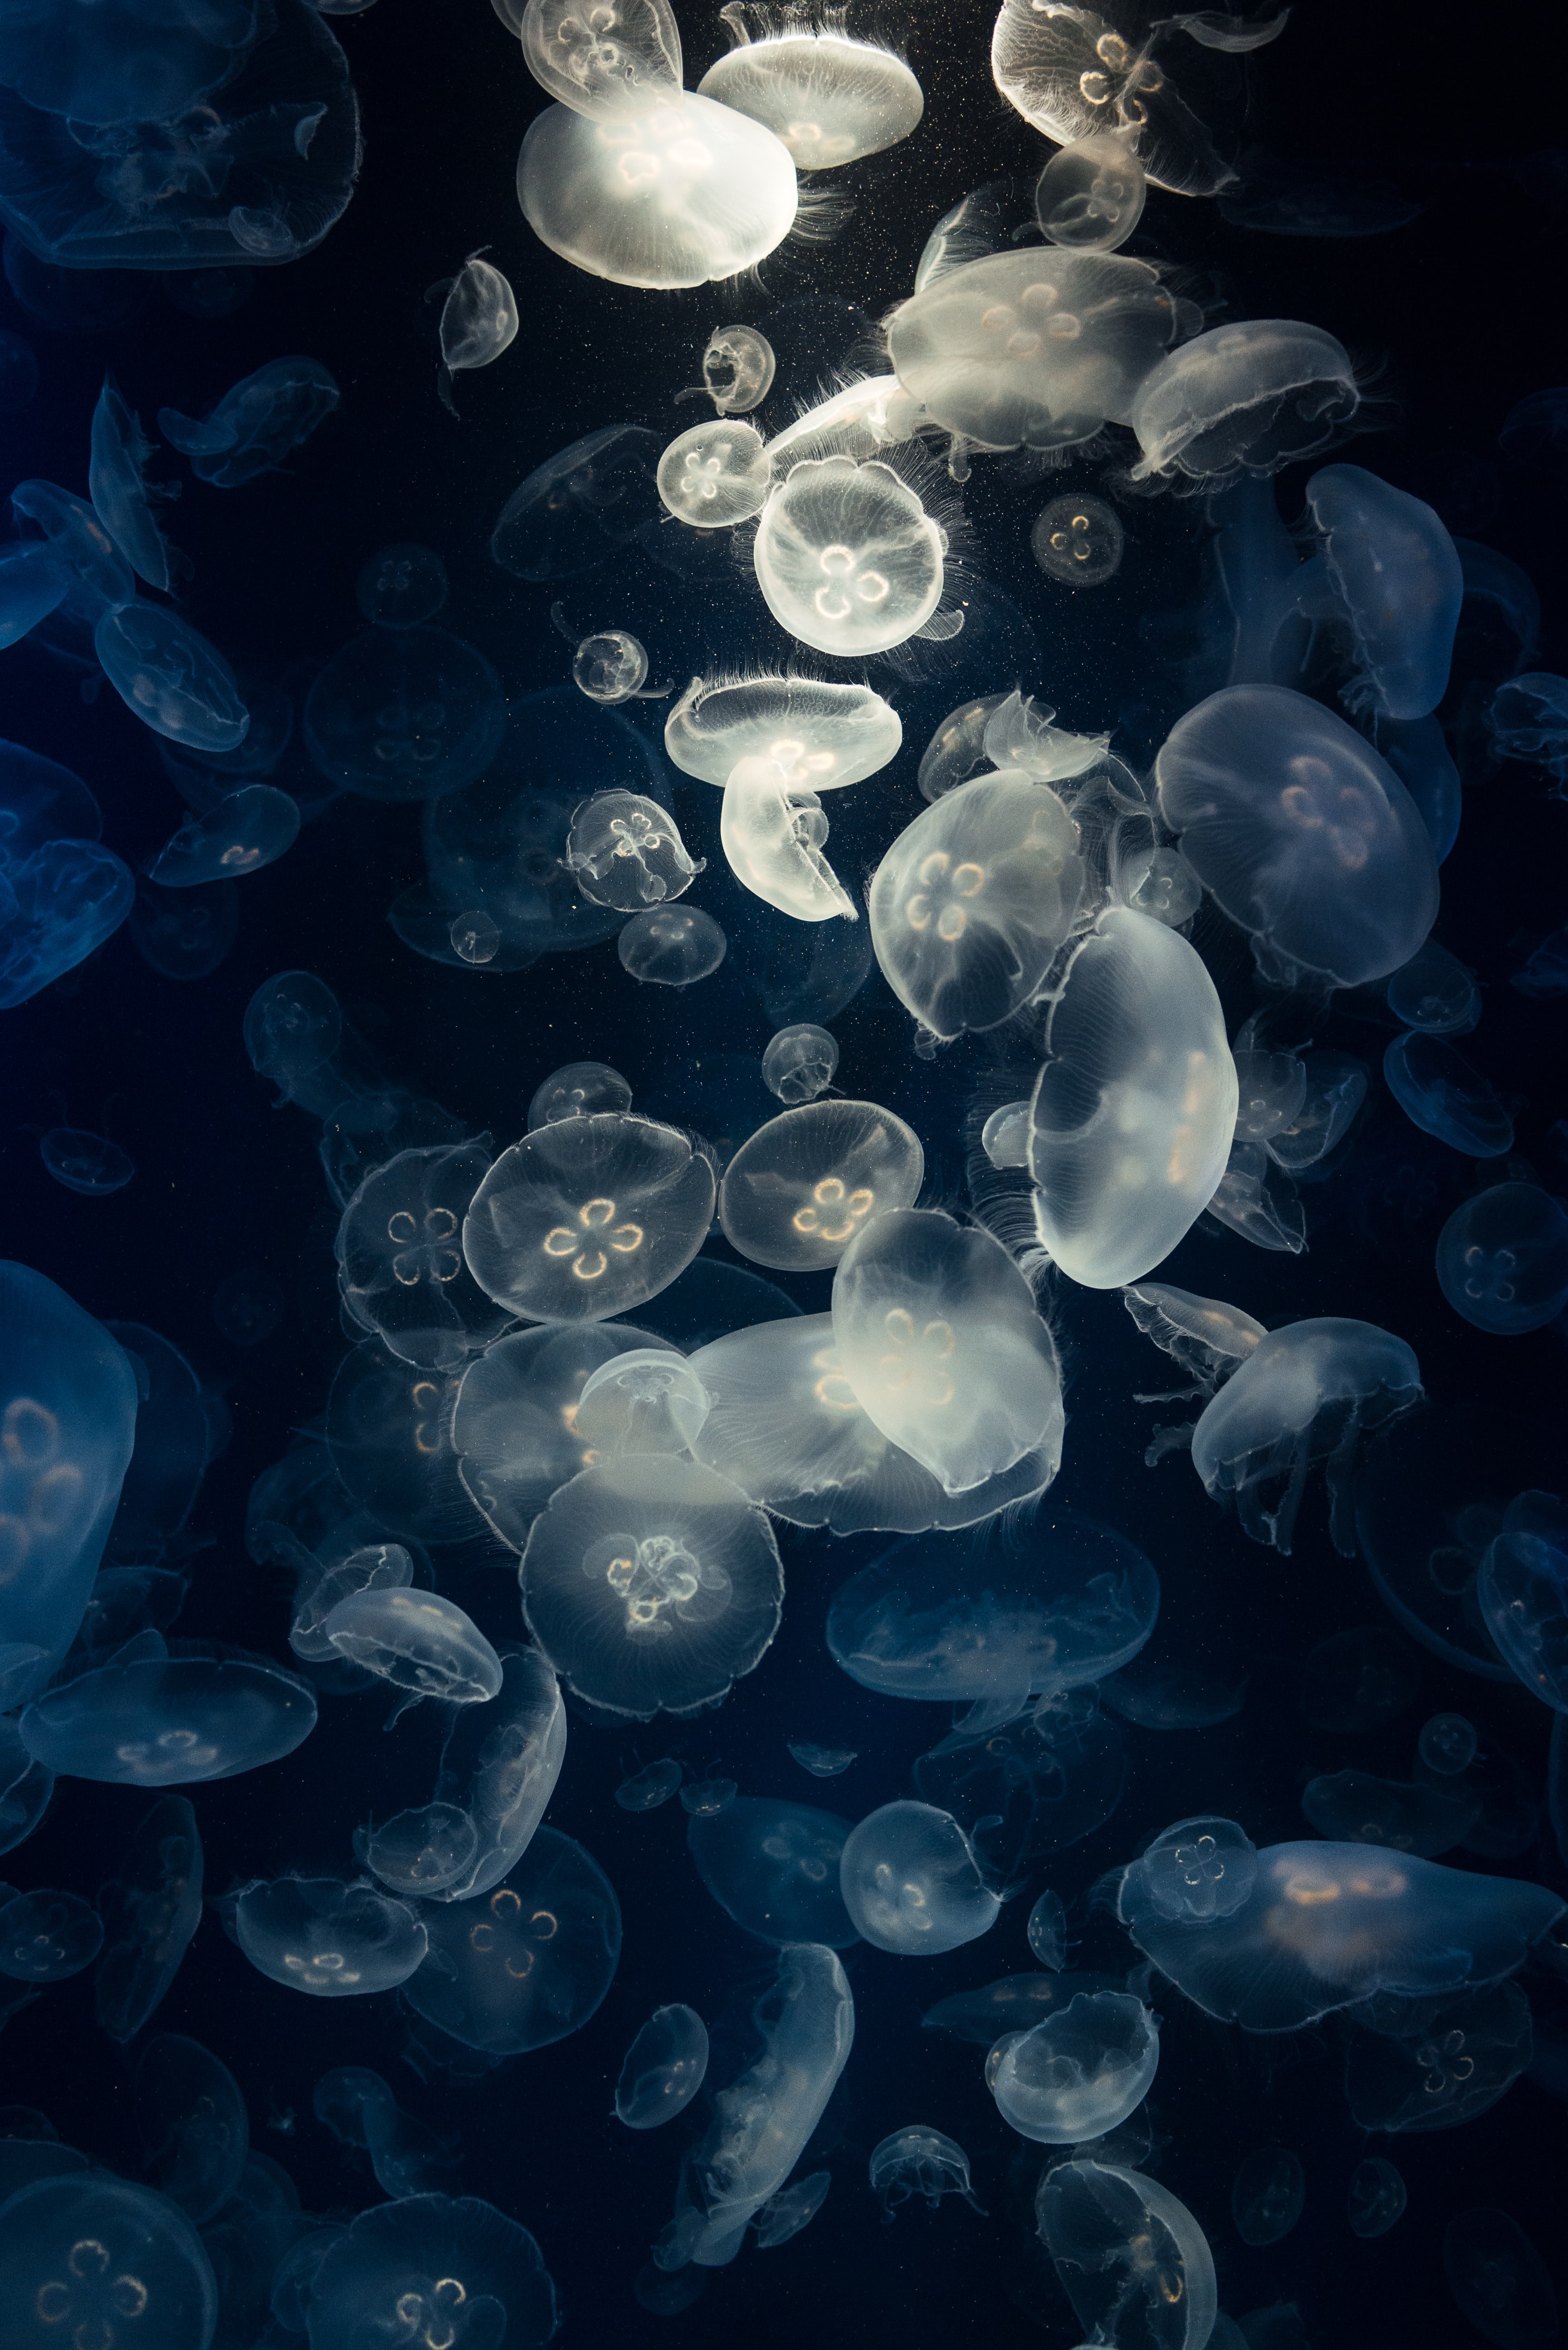 Cool Backgrounds animals, creatures, glow, jellyfish Under Water